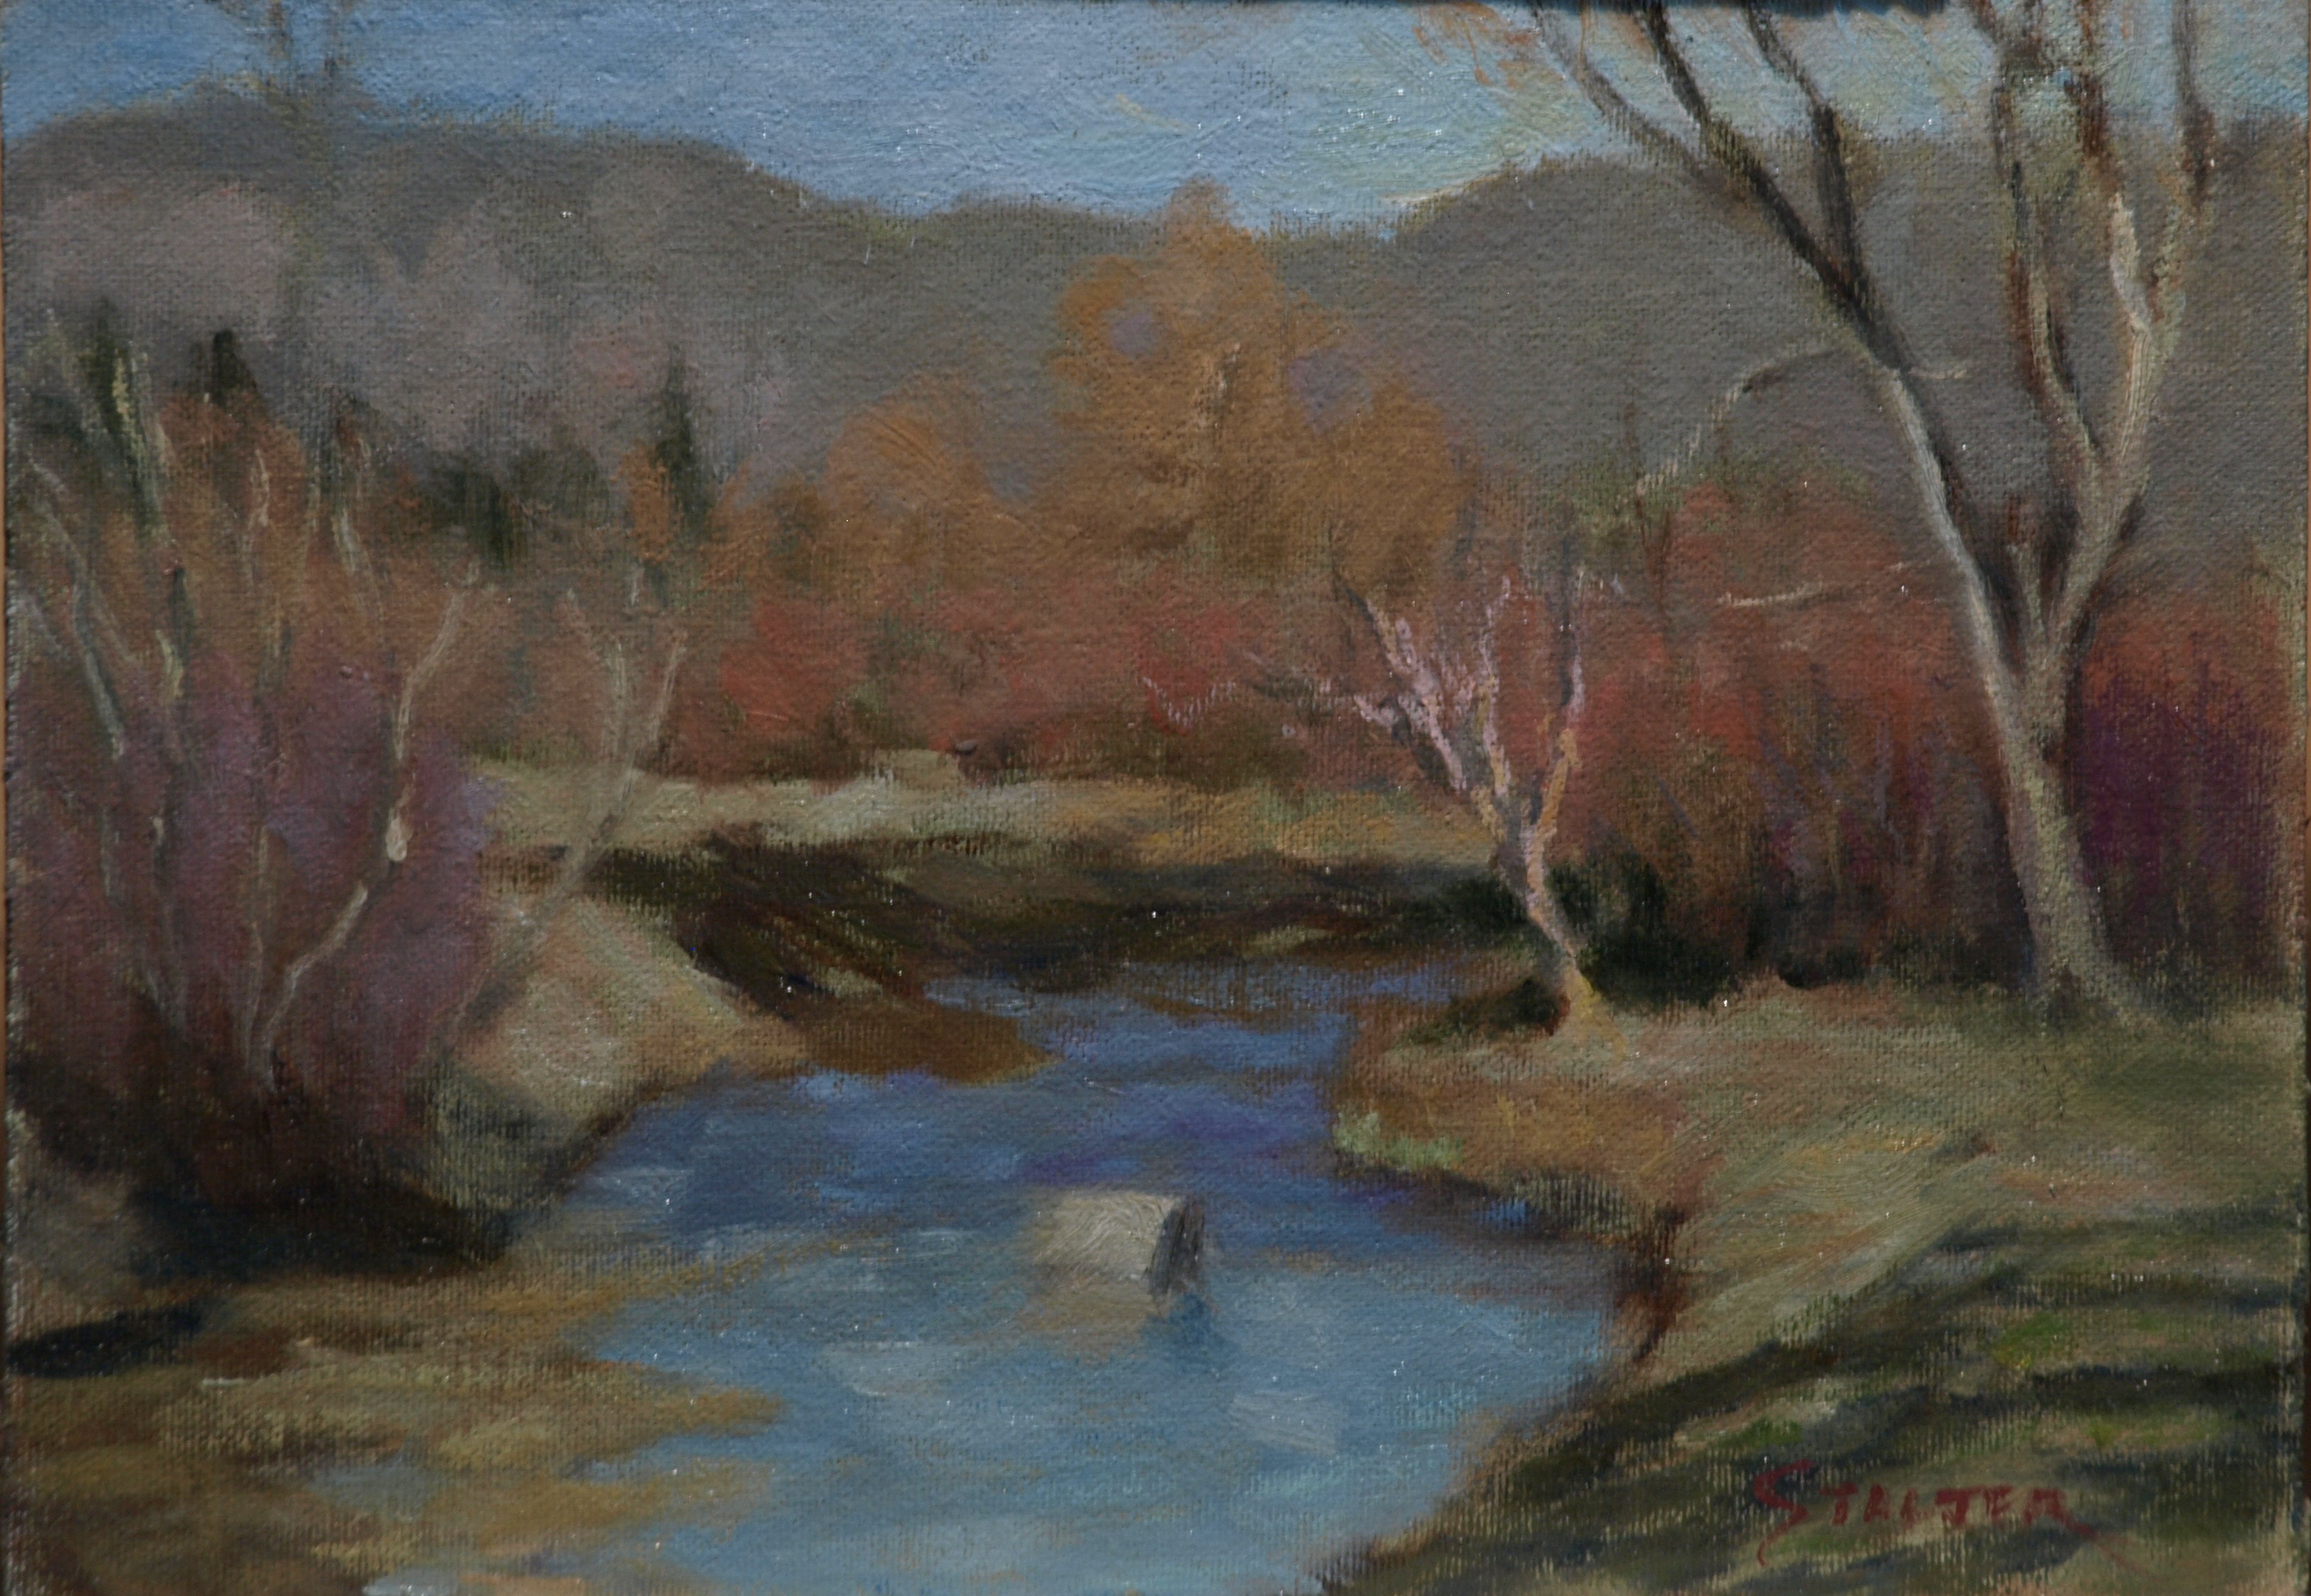 Autumn by the River, Oil on Canvas on Panel, 9 x 12 Inches, by Richard Stalter, $225